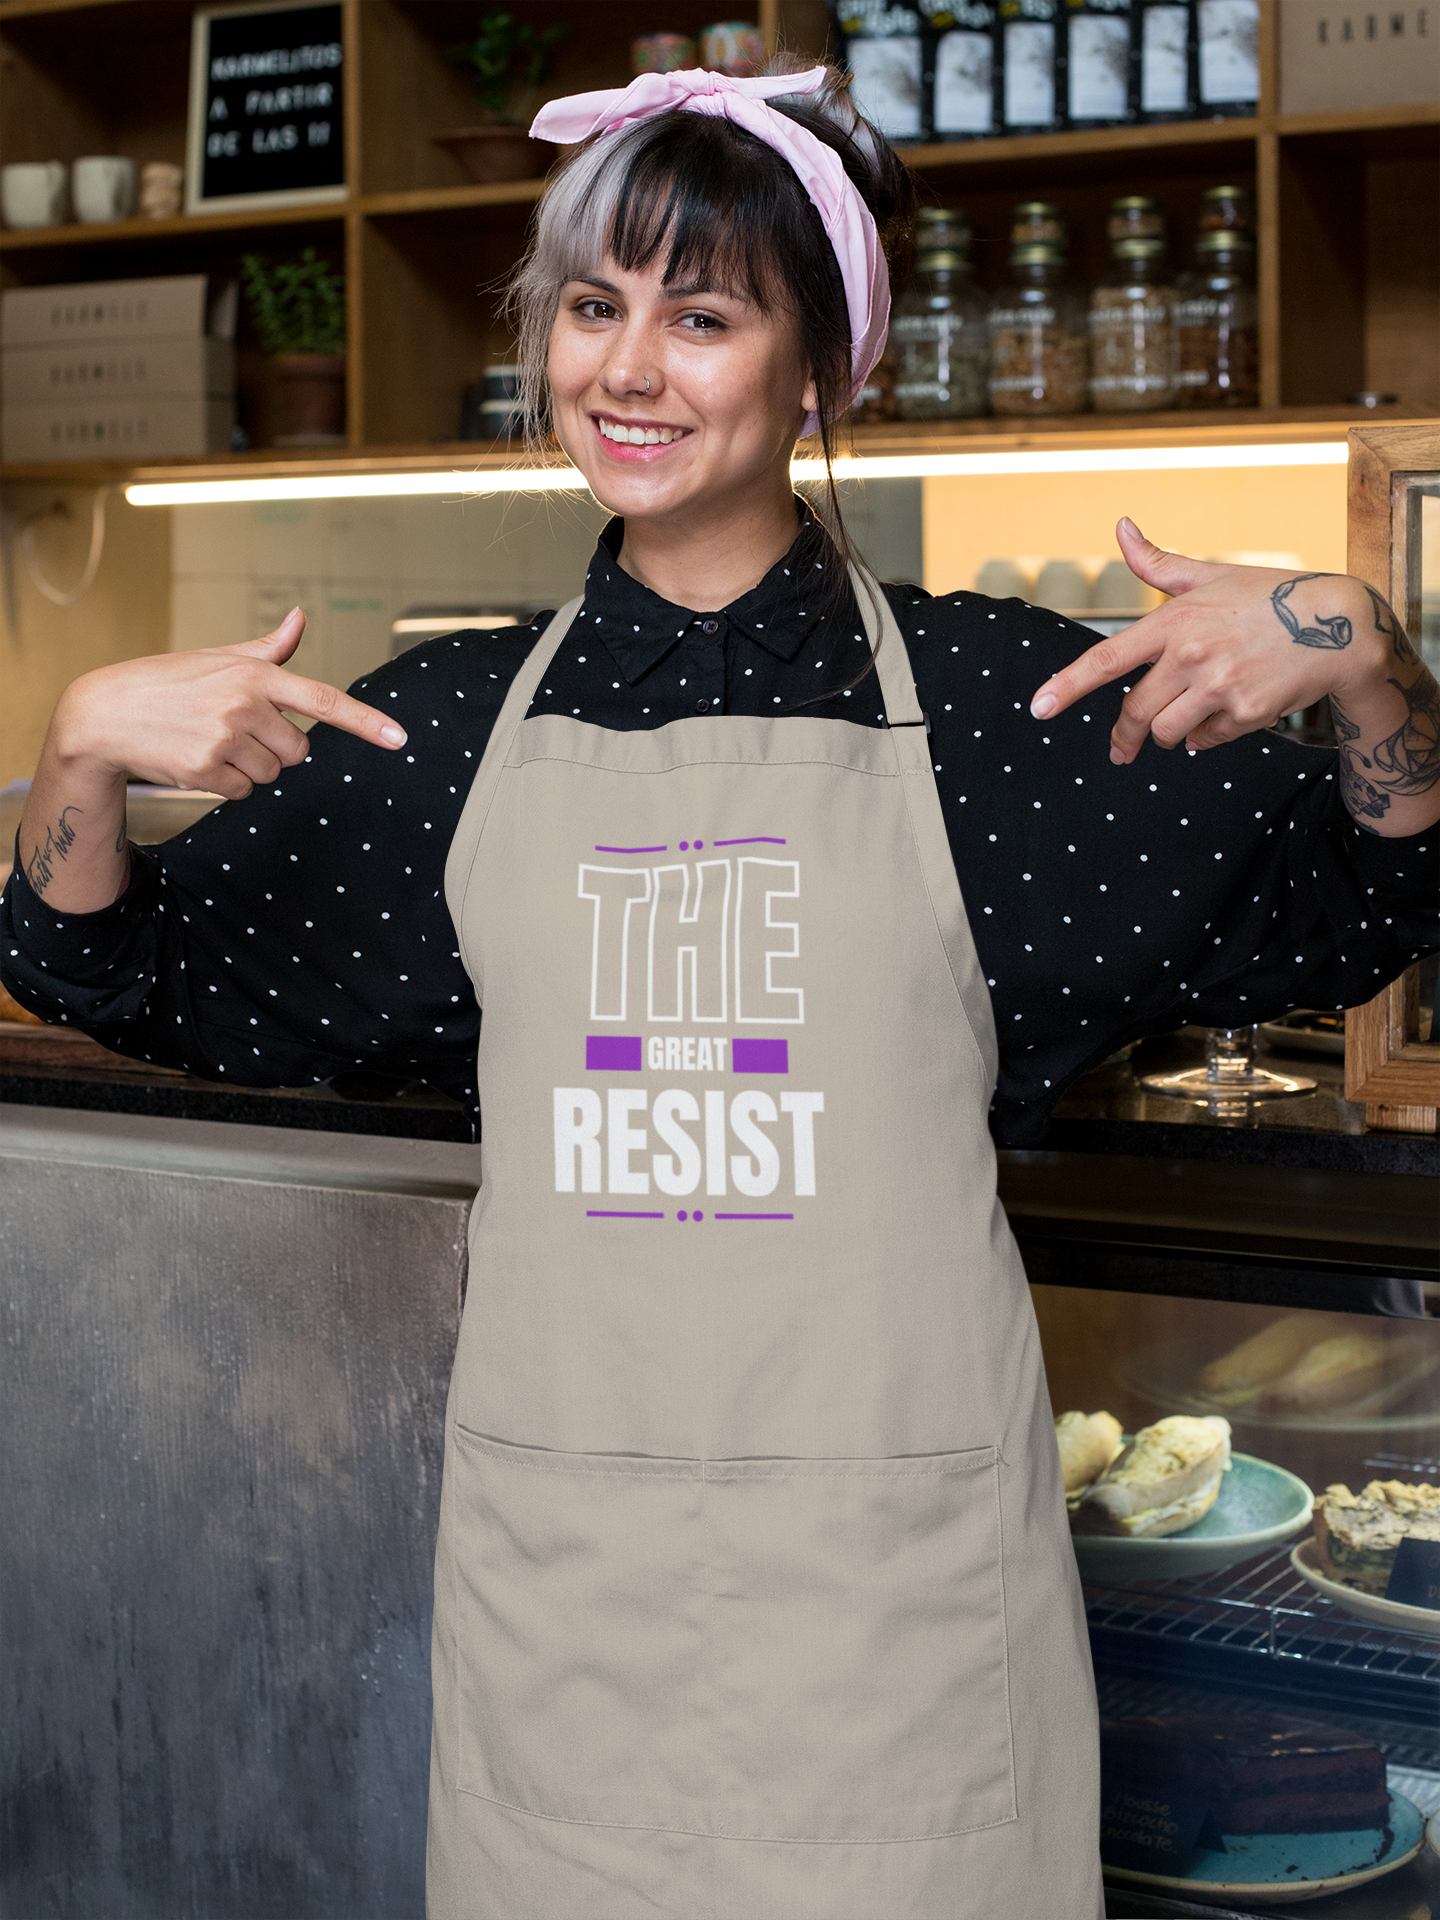 The Great Resist Apron